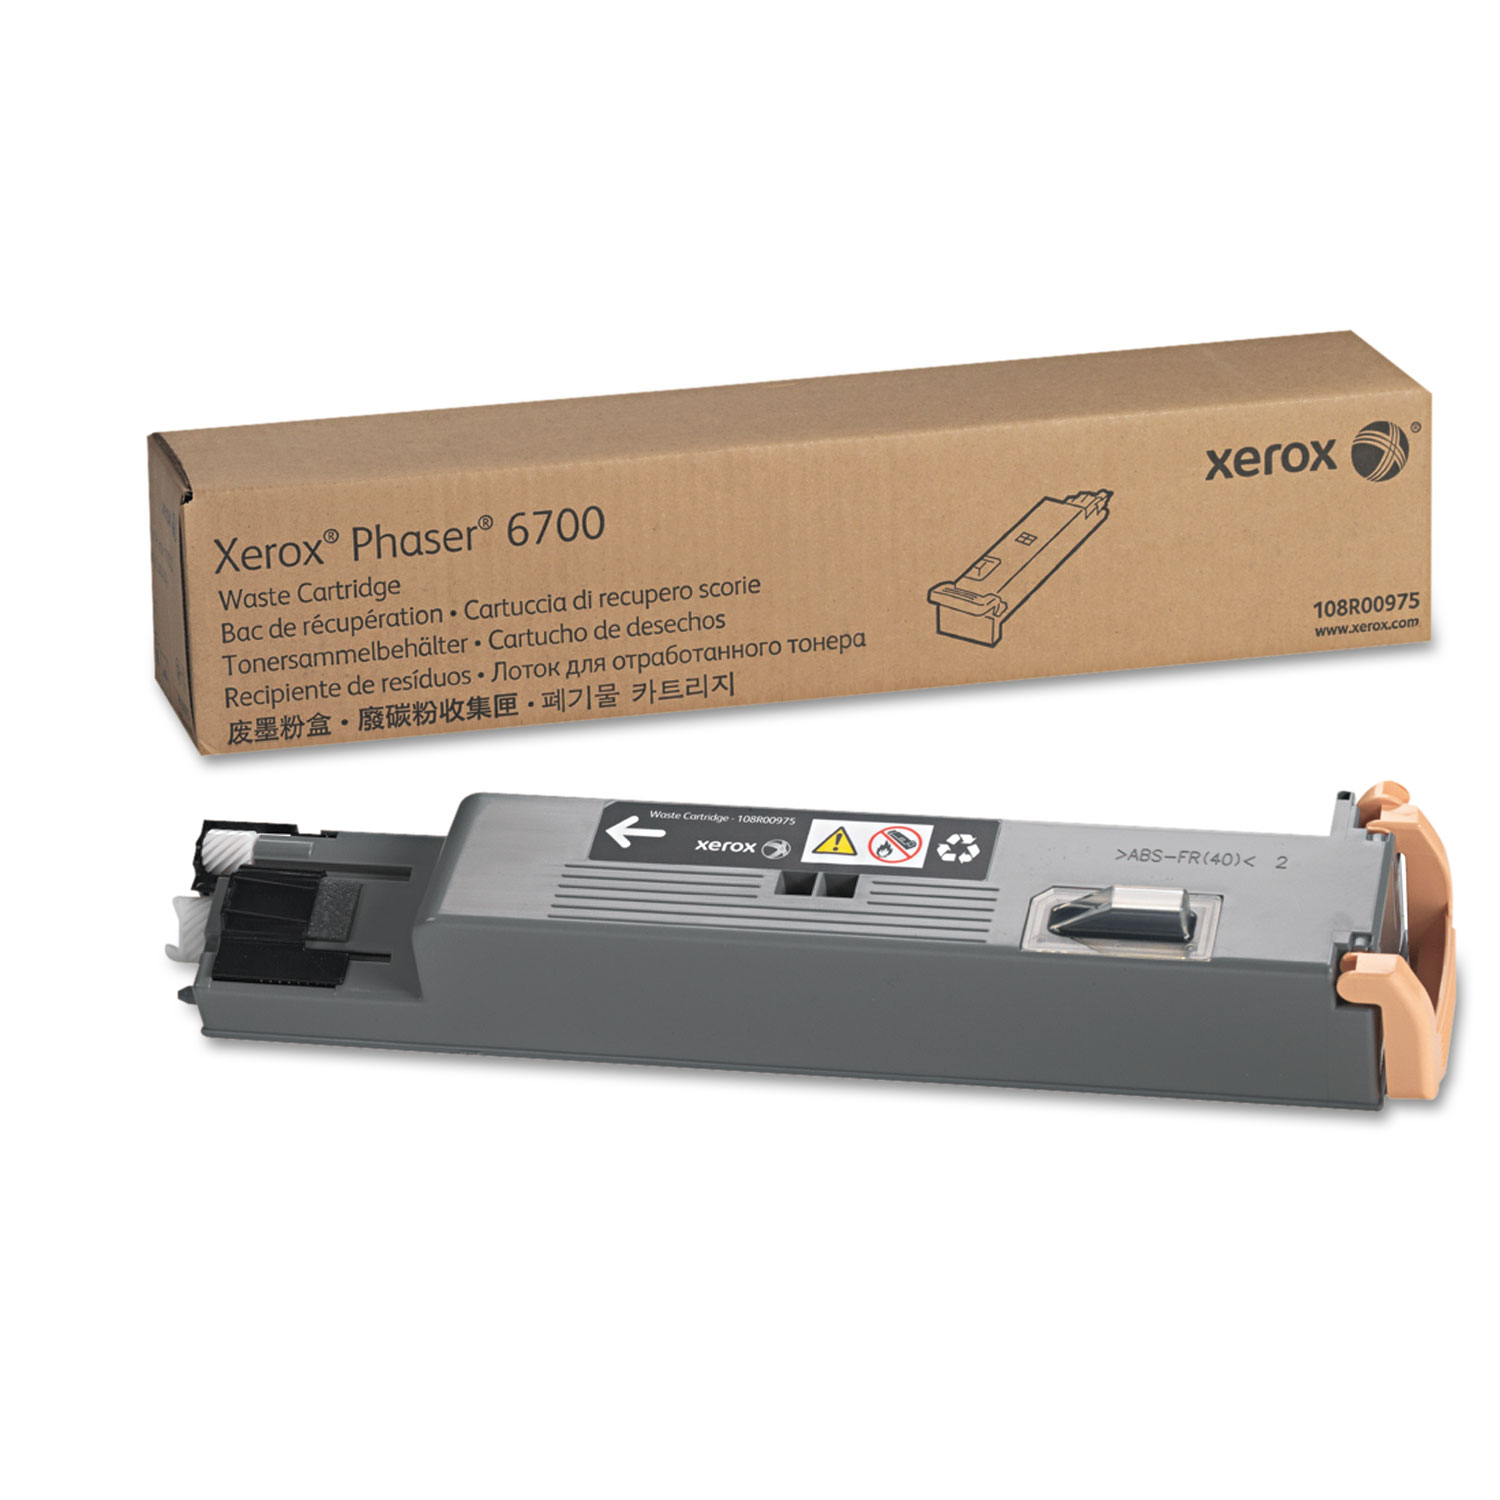 108R00975 Waste Cartridge, 25,000 Page-Yield